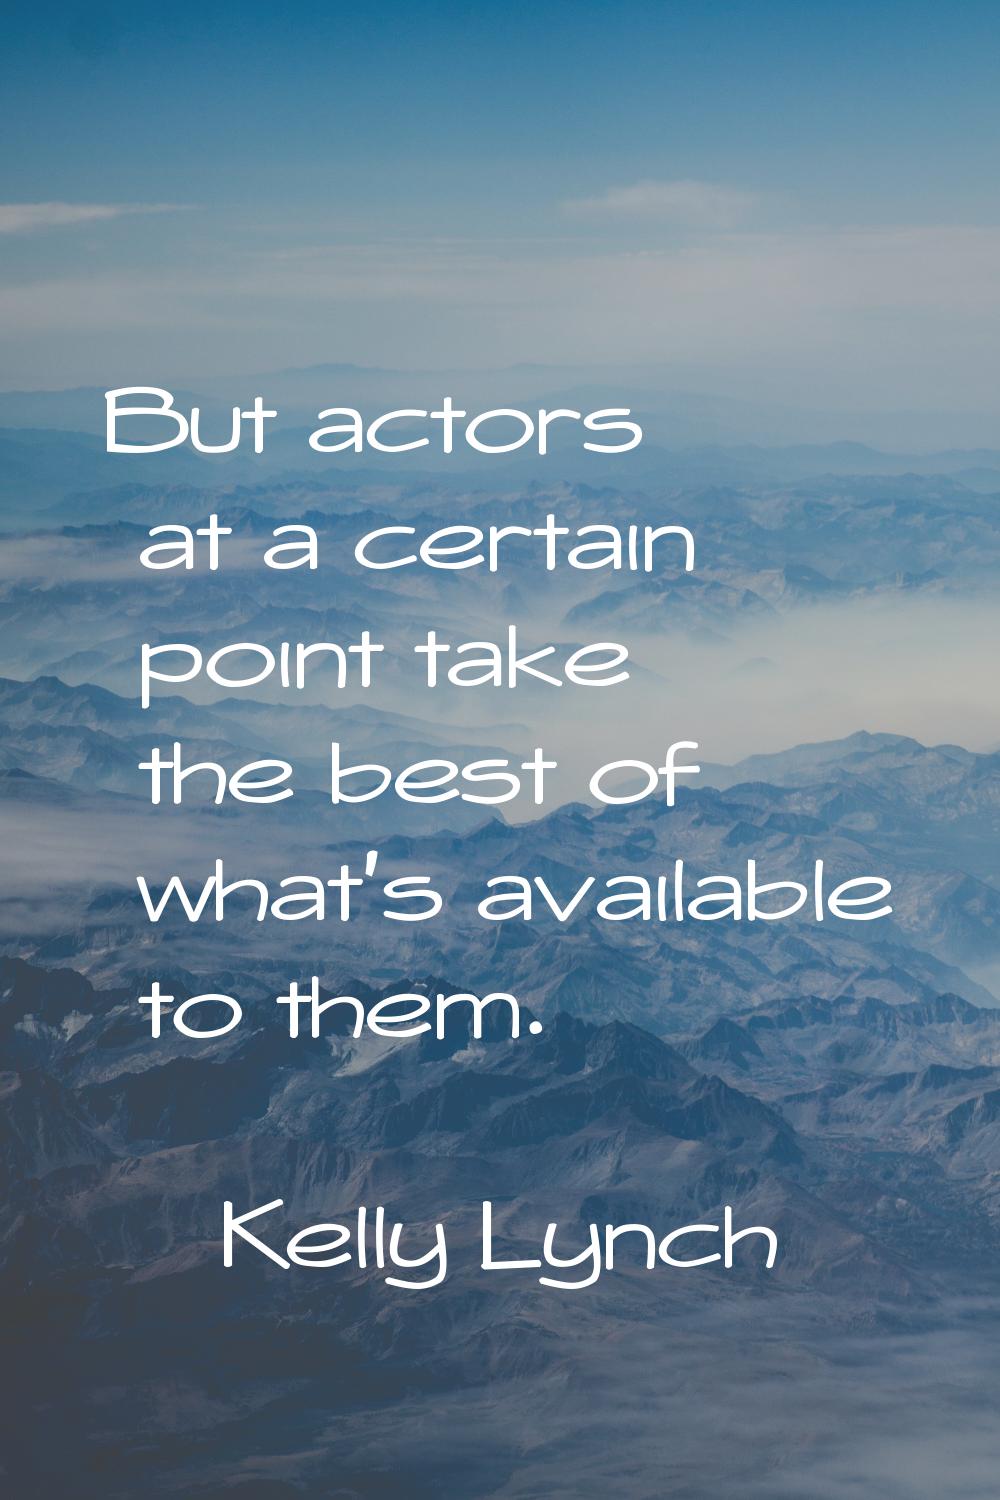 But actors at a certain point take the best of what's available to them.